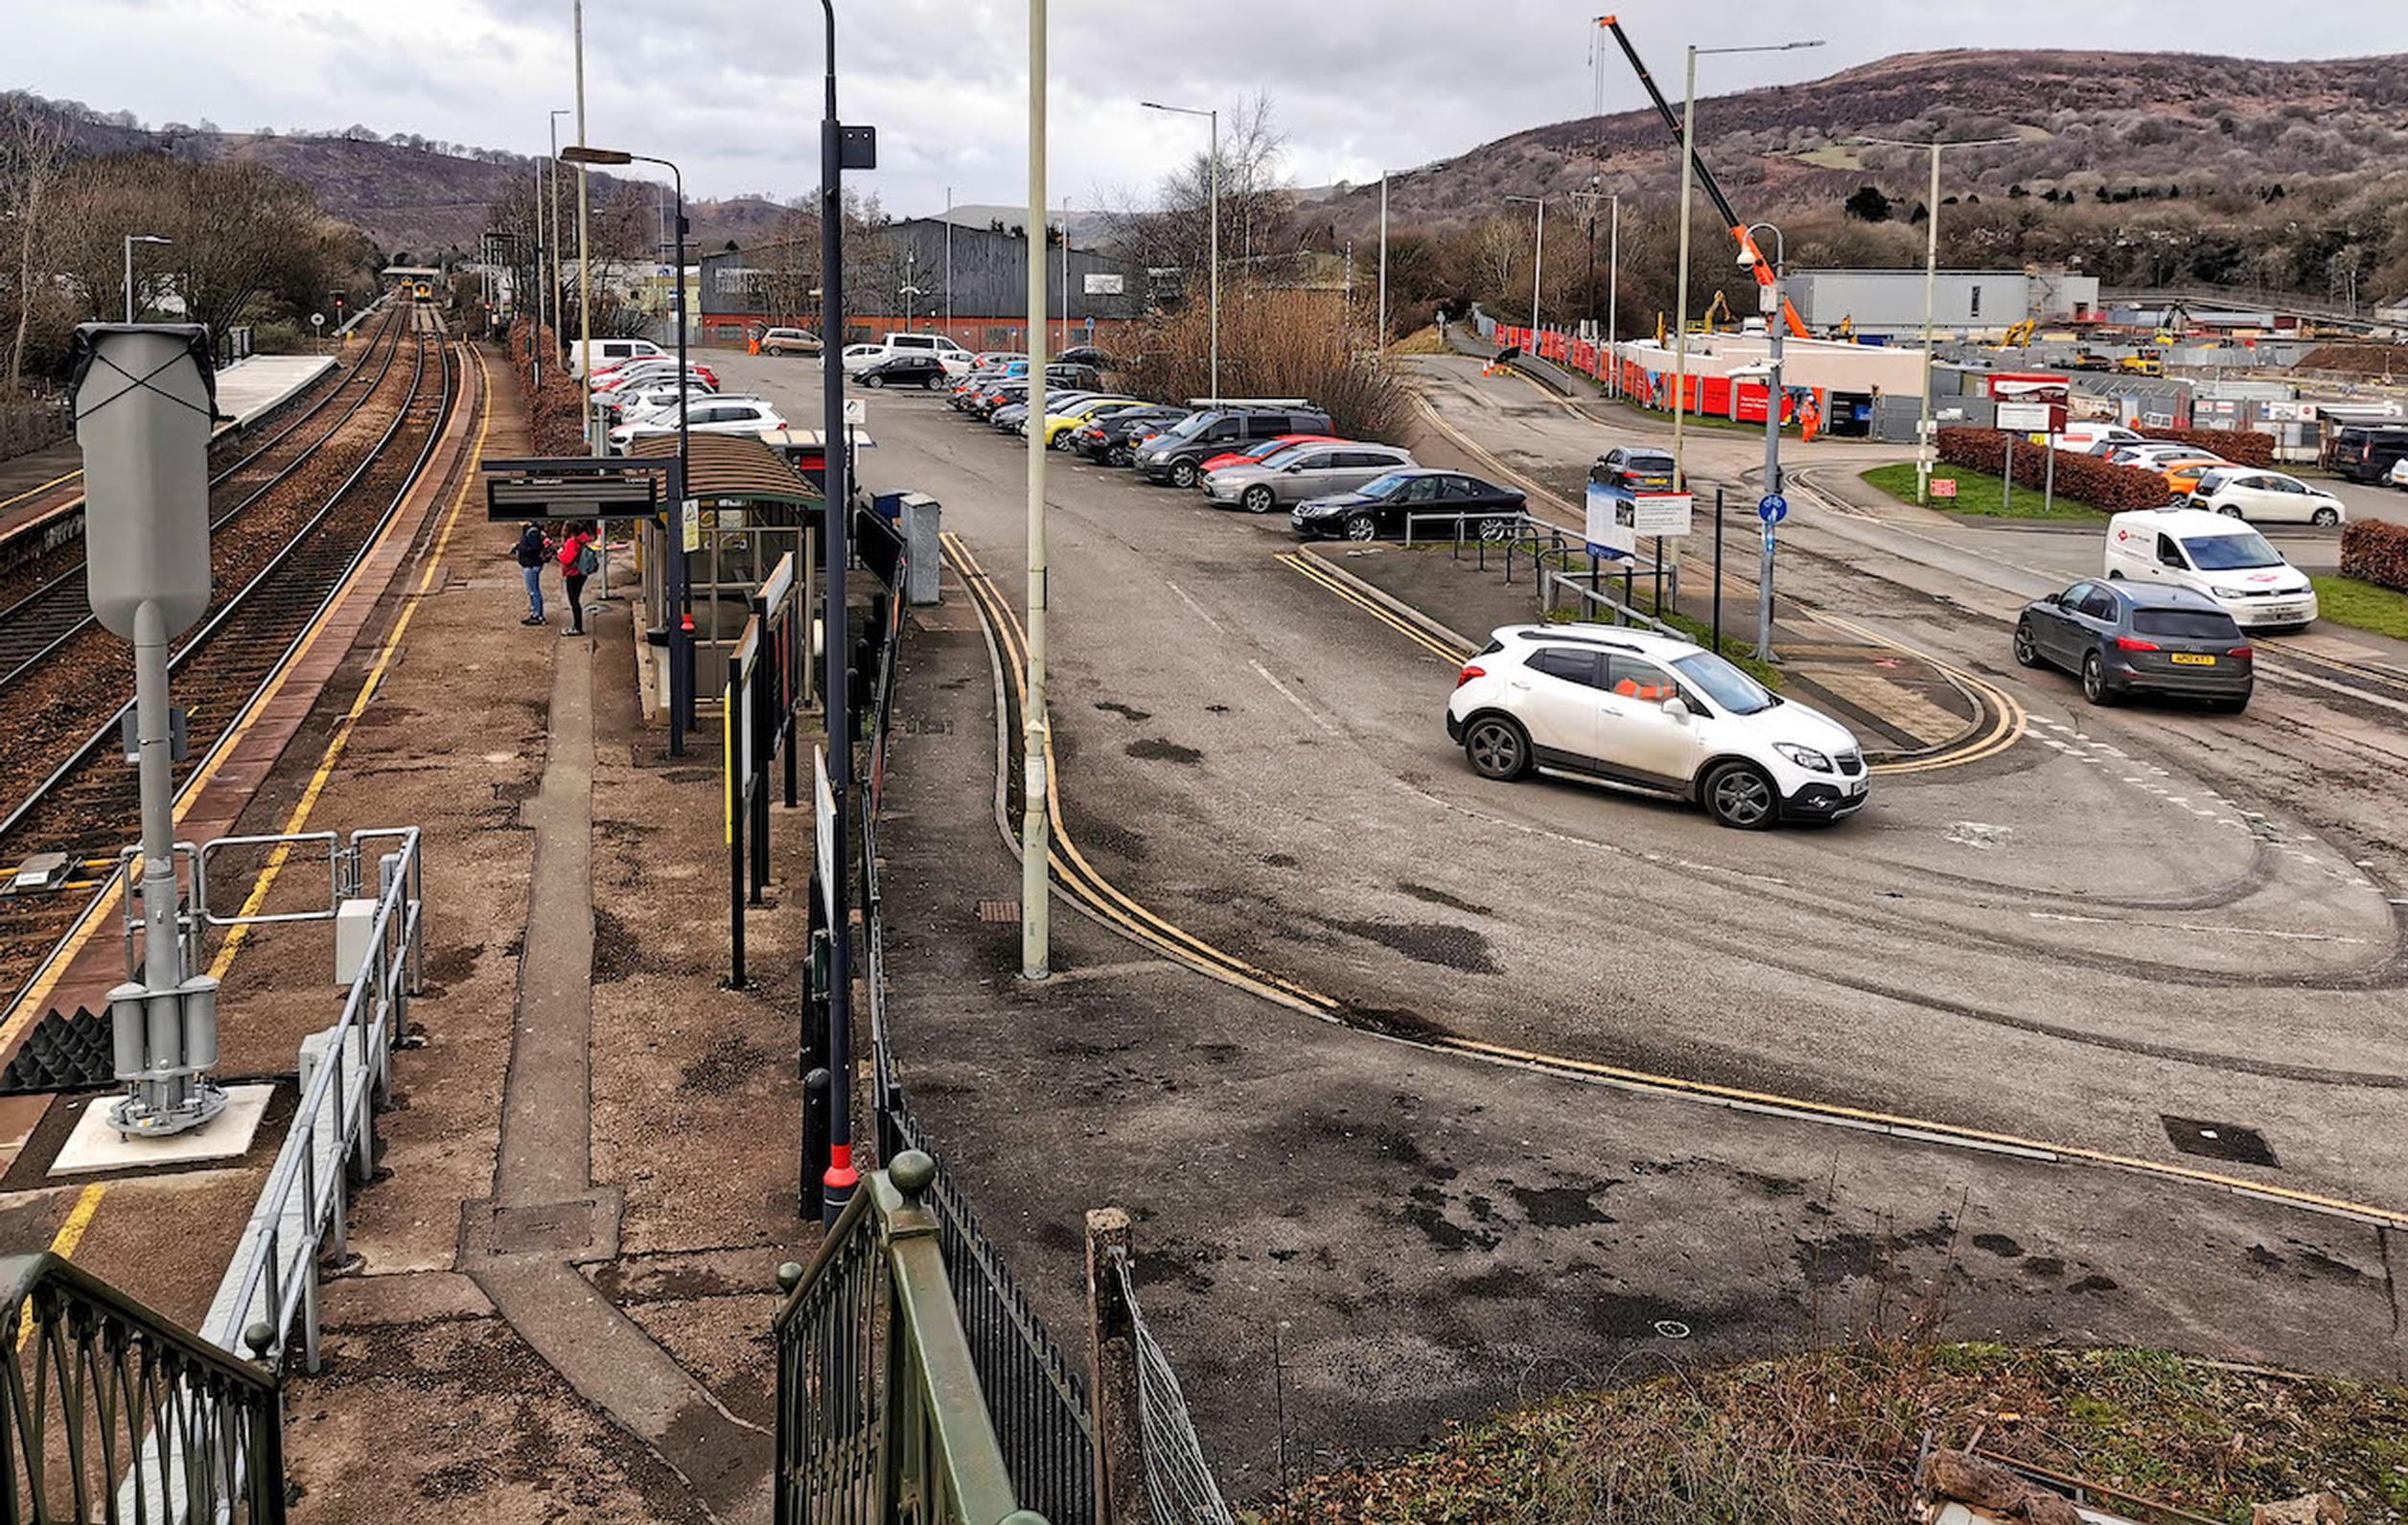 Taff Well`s rail station car park and deposit site